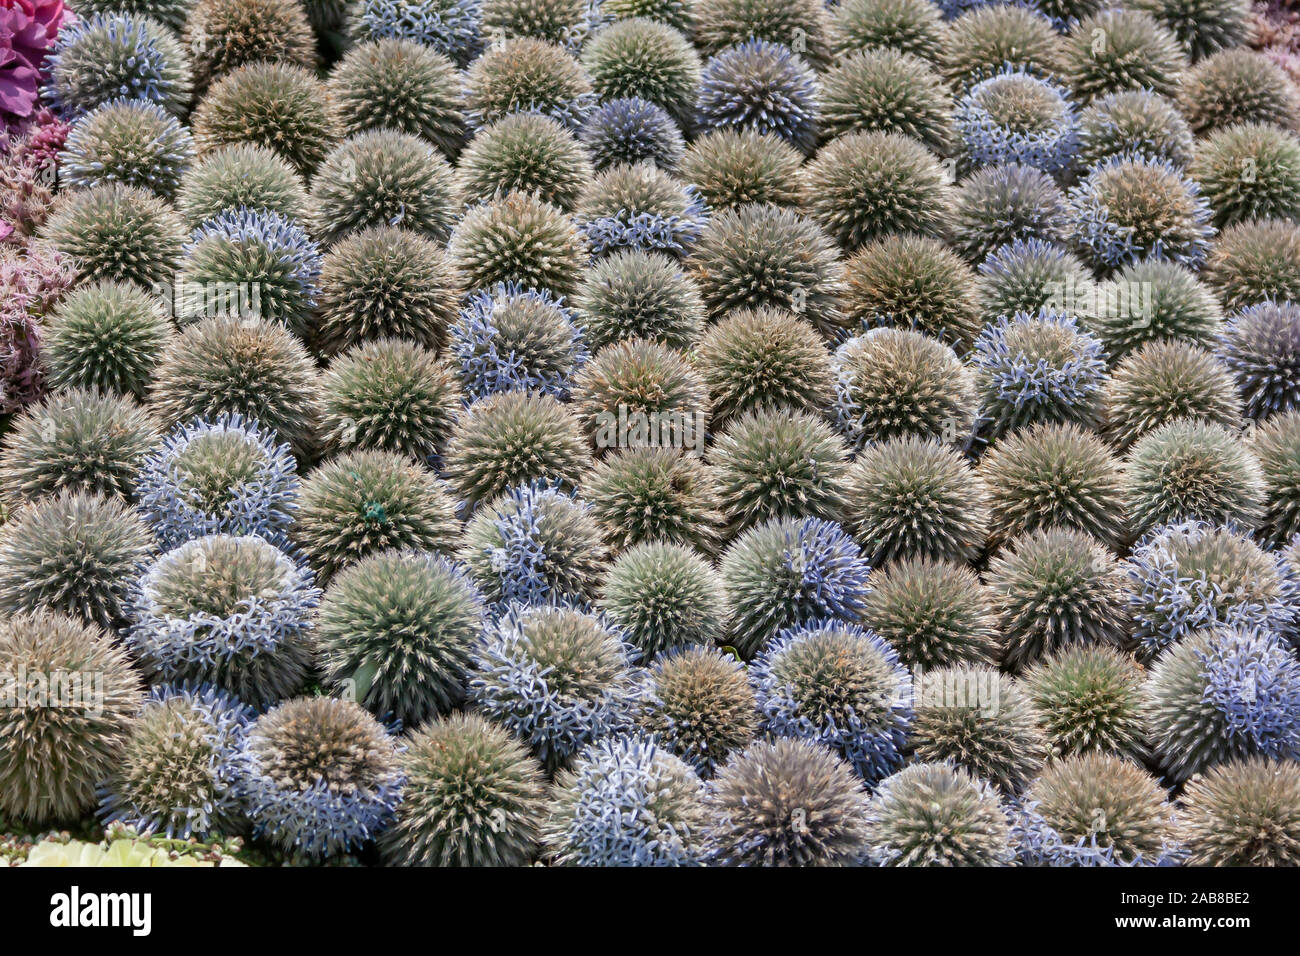 Wide angle beautiful background of cactus plants. Colorful green Echinocactus plants. Wallpaper with cactus-es Stock Photo